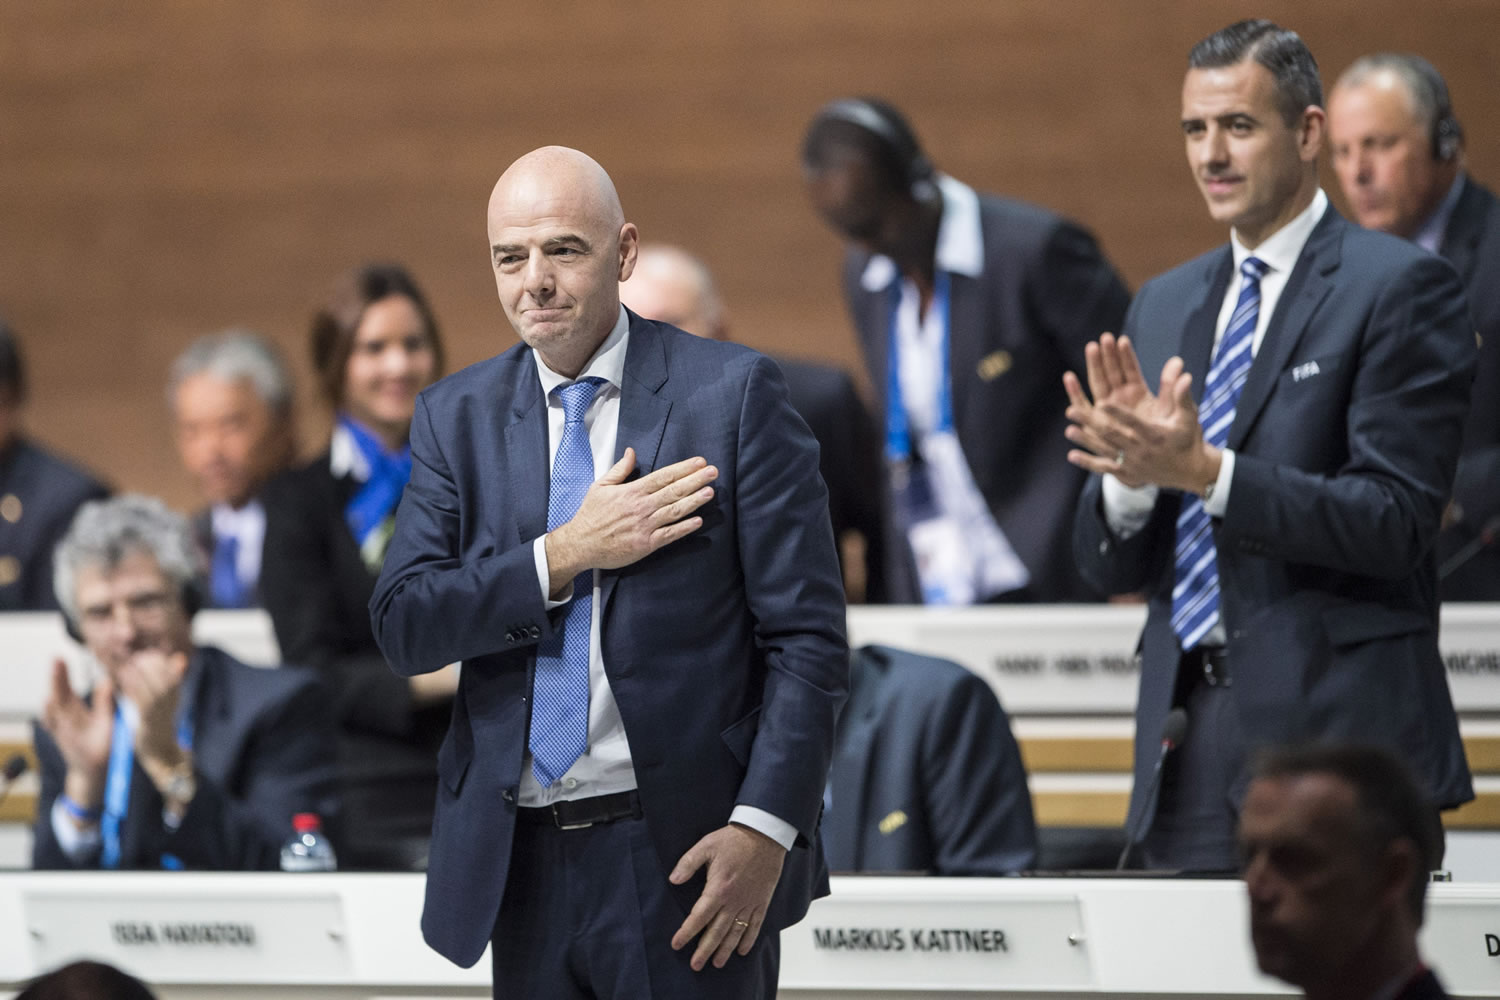 Gianni Infantino, the new FIFA President, of Switzerland receives applause  during the Extraordinary FIFA Congress 2016   in Zurich, Switzerland, Friday, February 26, 2016. Gianni Infantino of Switzerland is the new FIFA president after winning a second-round vote. Infantino got 115 of the 207 eligible votes to take a decisive majority ahead of Sheikh Salman of Bahrain.